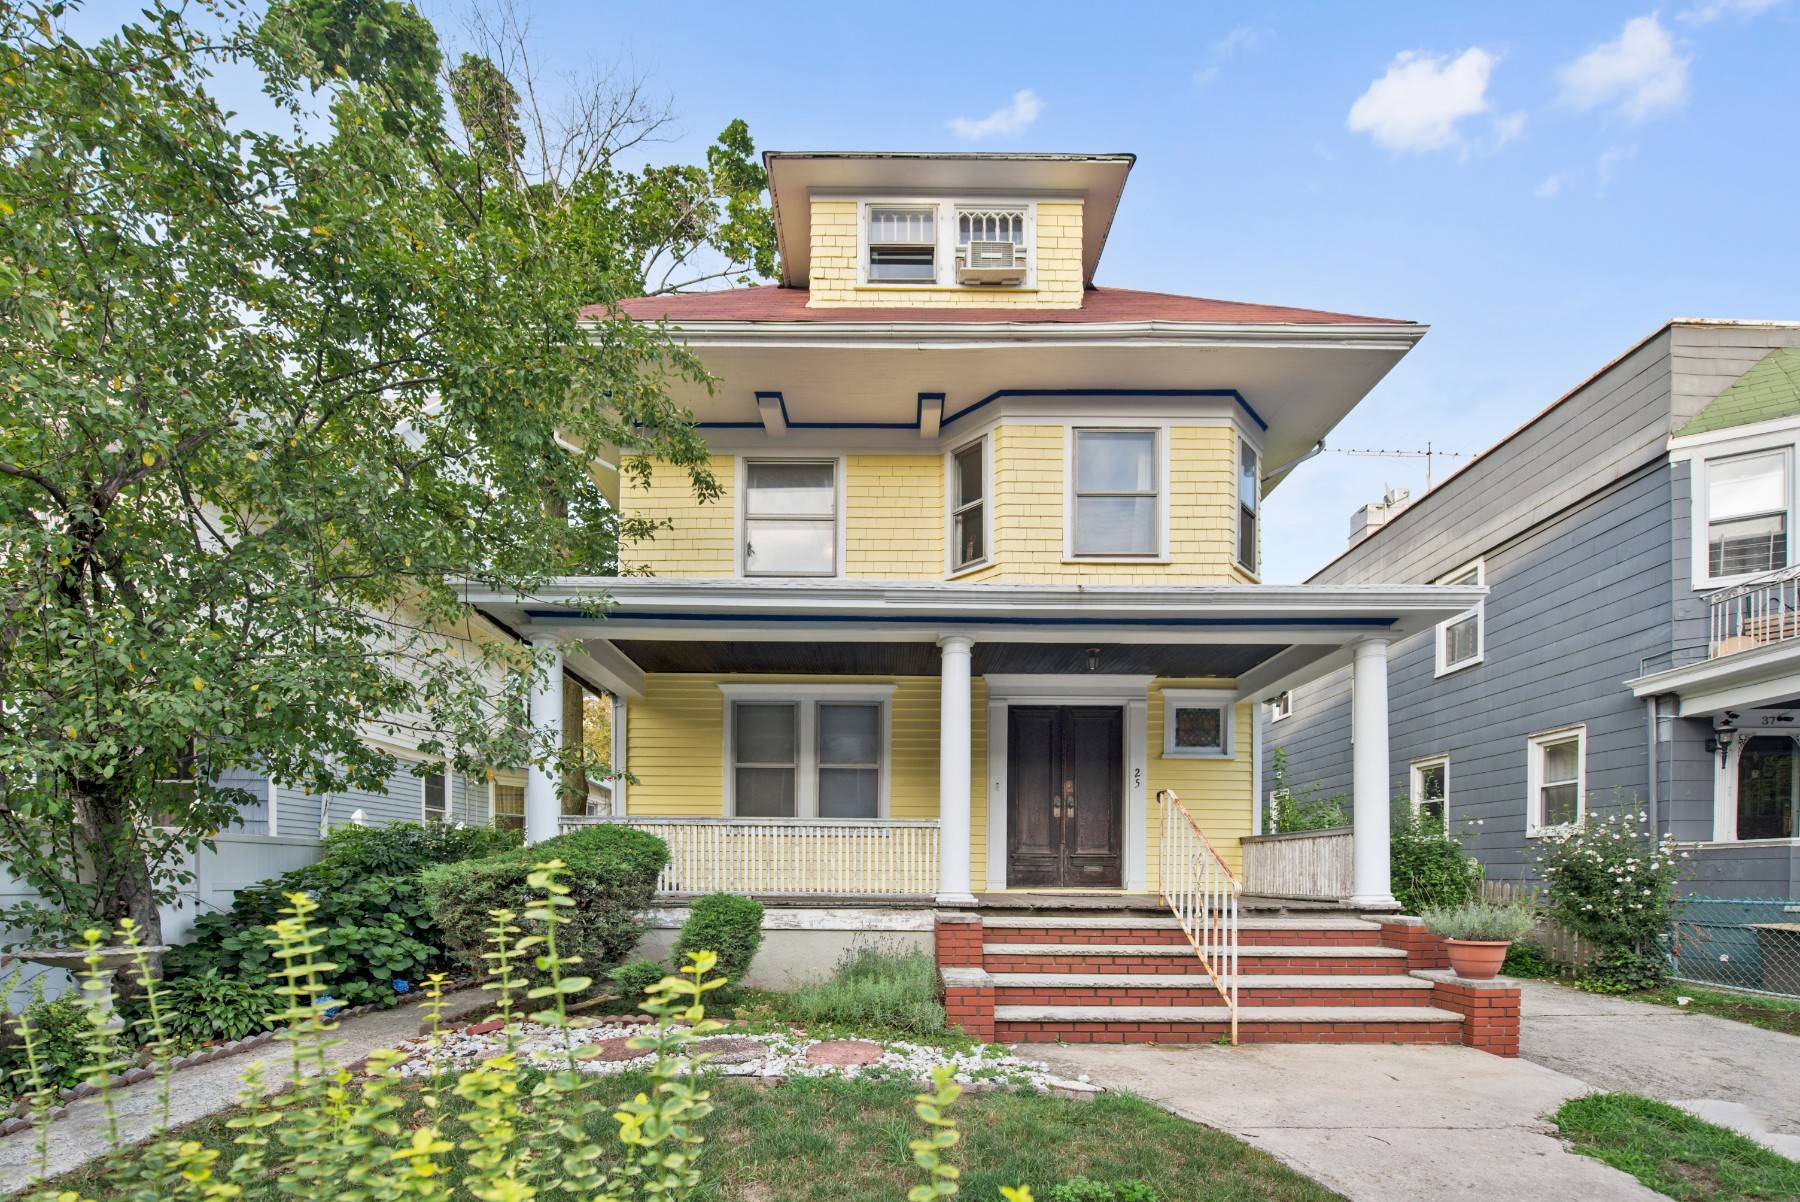 Exciting opportunity to live in a beautiful fully detached renovated Victorian home in the neighborhood of Prospect Park South with its original designs which adds warmth offers a spacious one ...